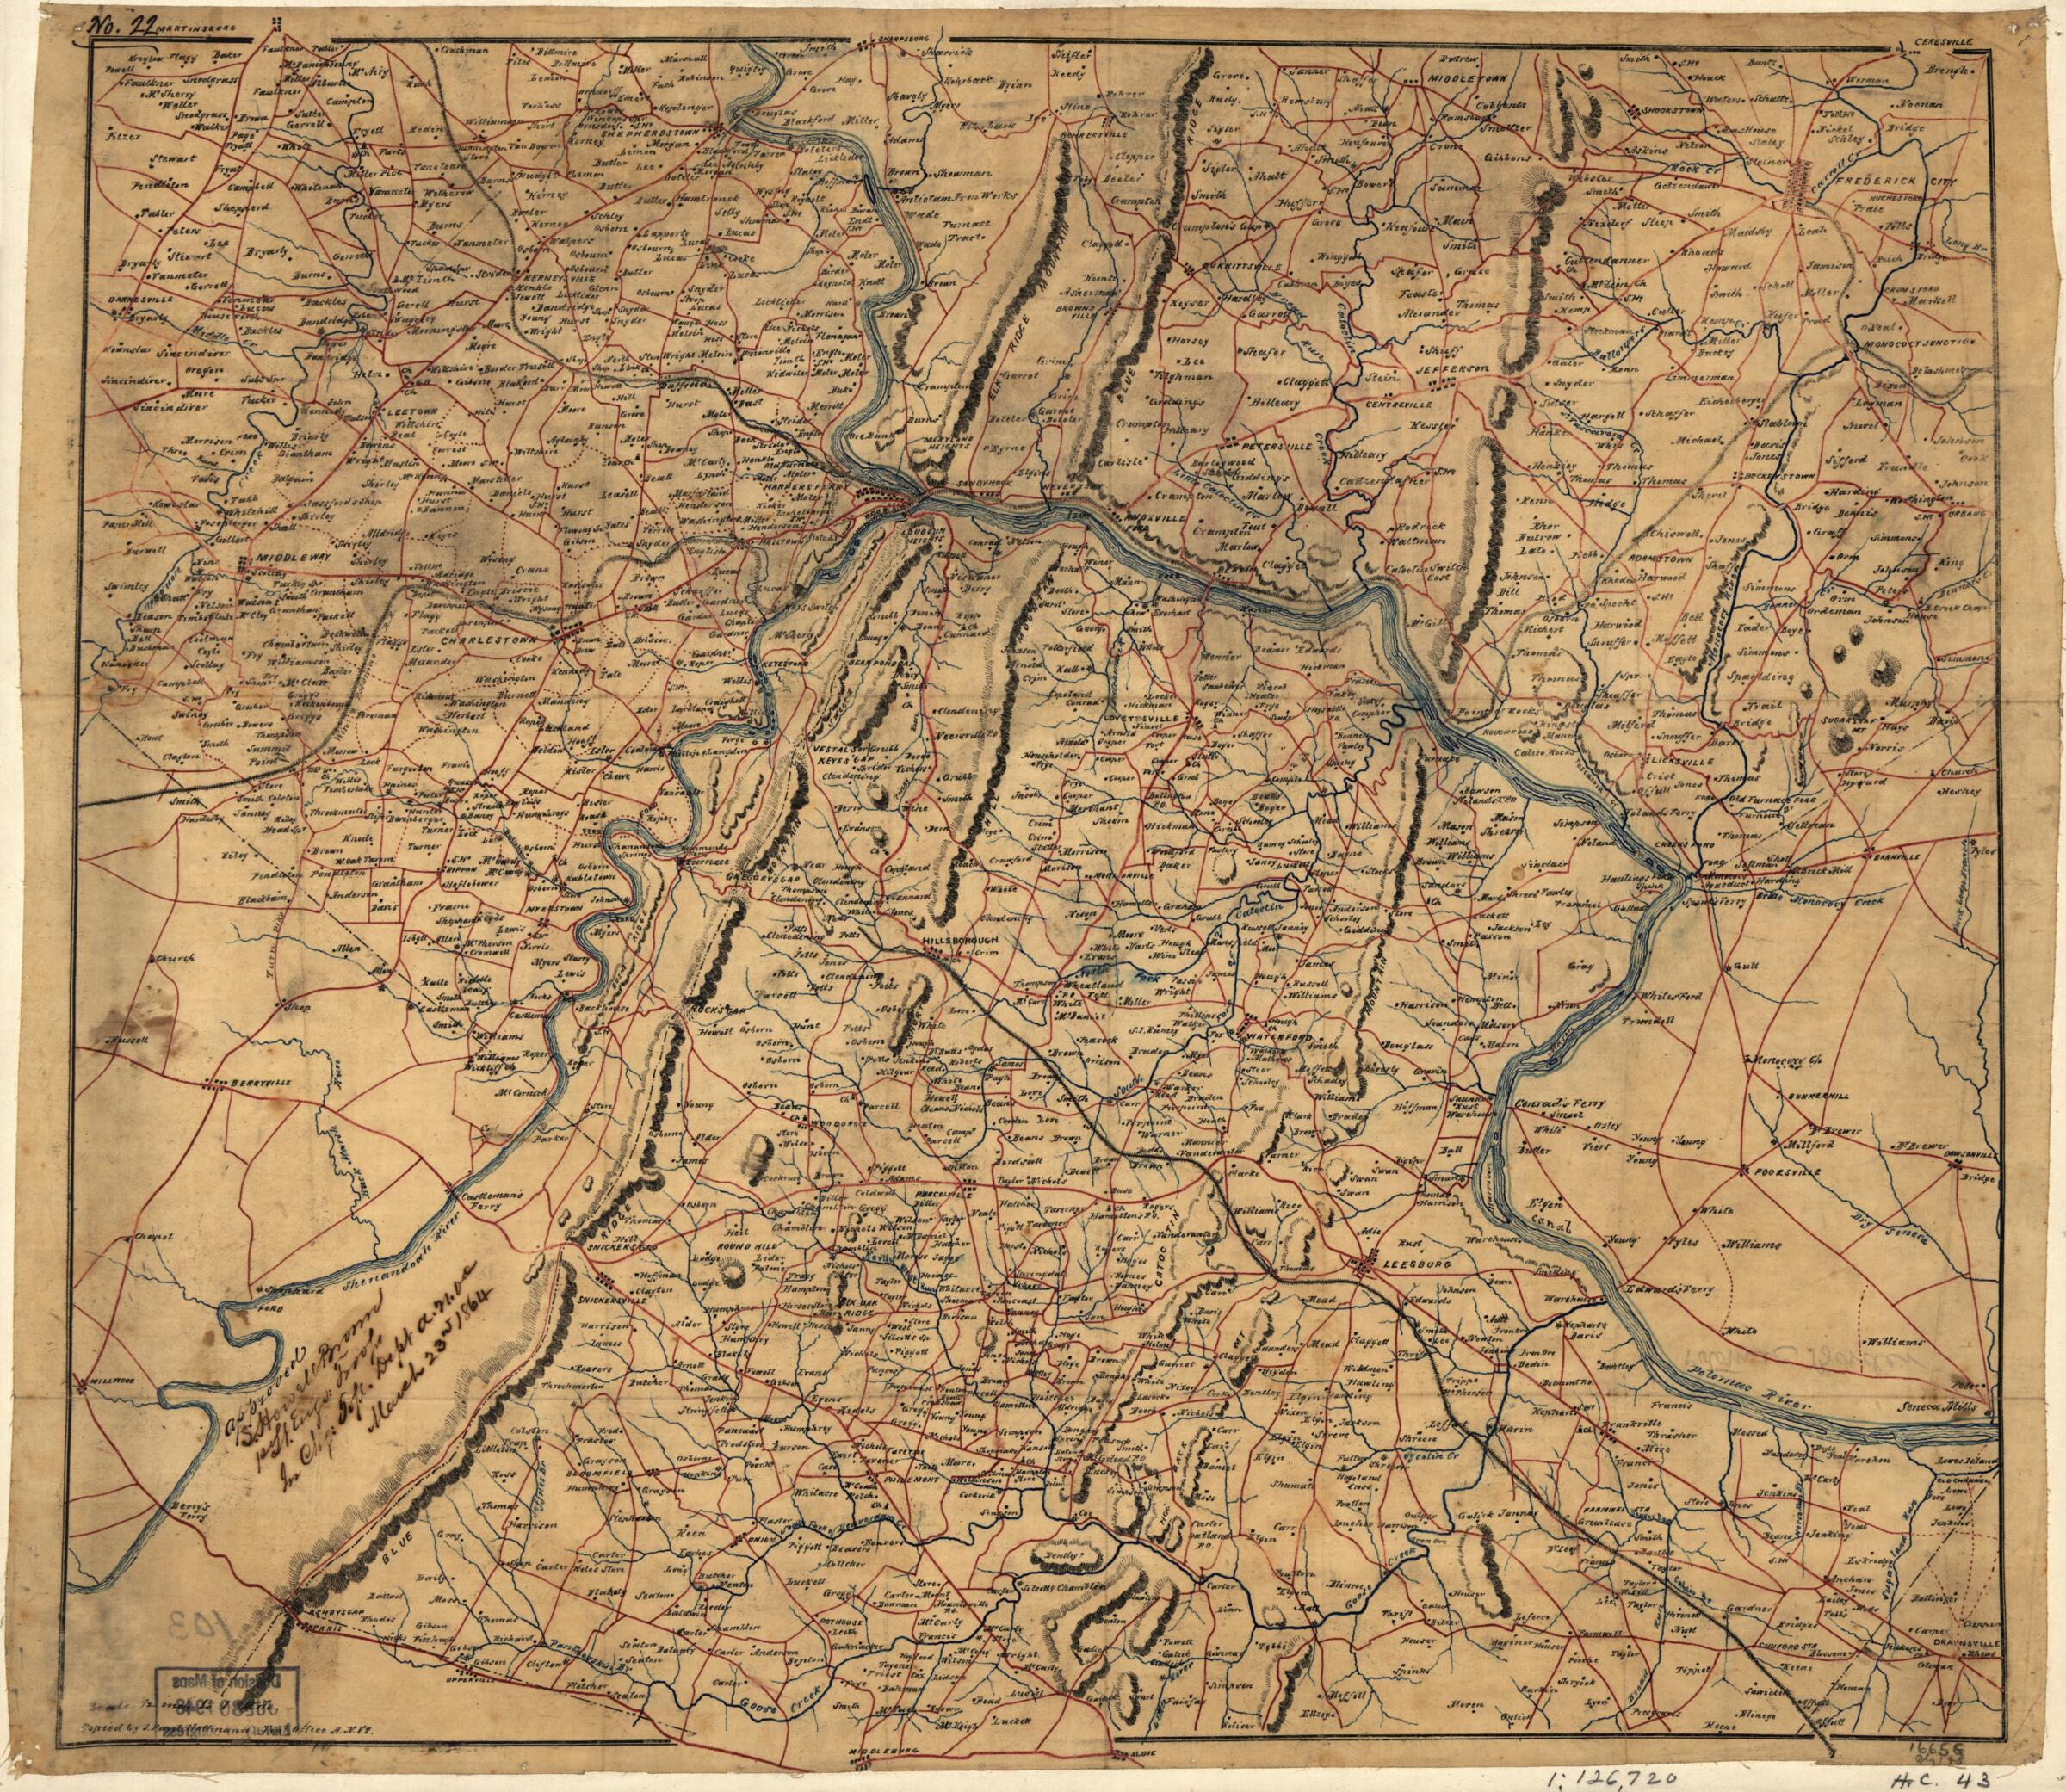 This old map of Map of Loudoun County and Part of Clarke County, Va., Jefferson County and Part of Berkeley County, W. Va., and Parts of Montgomery and Frederick Counties, Md. from 1864 was created by Samuel Howell Brown, Paul Hoffmann in 1864